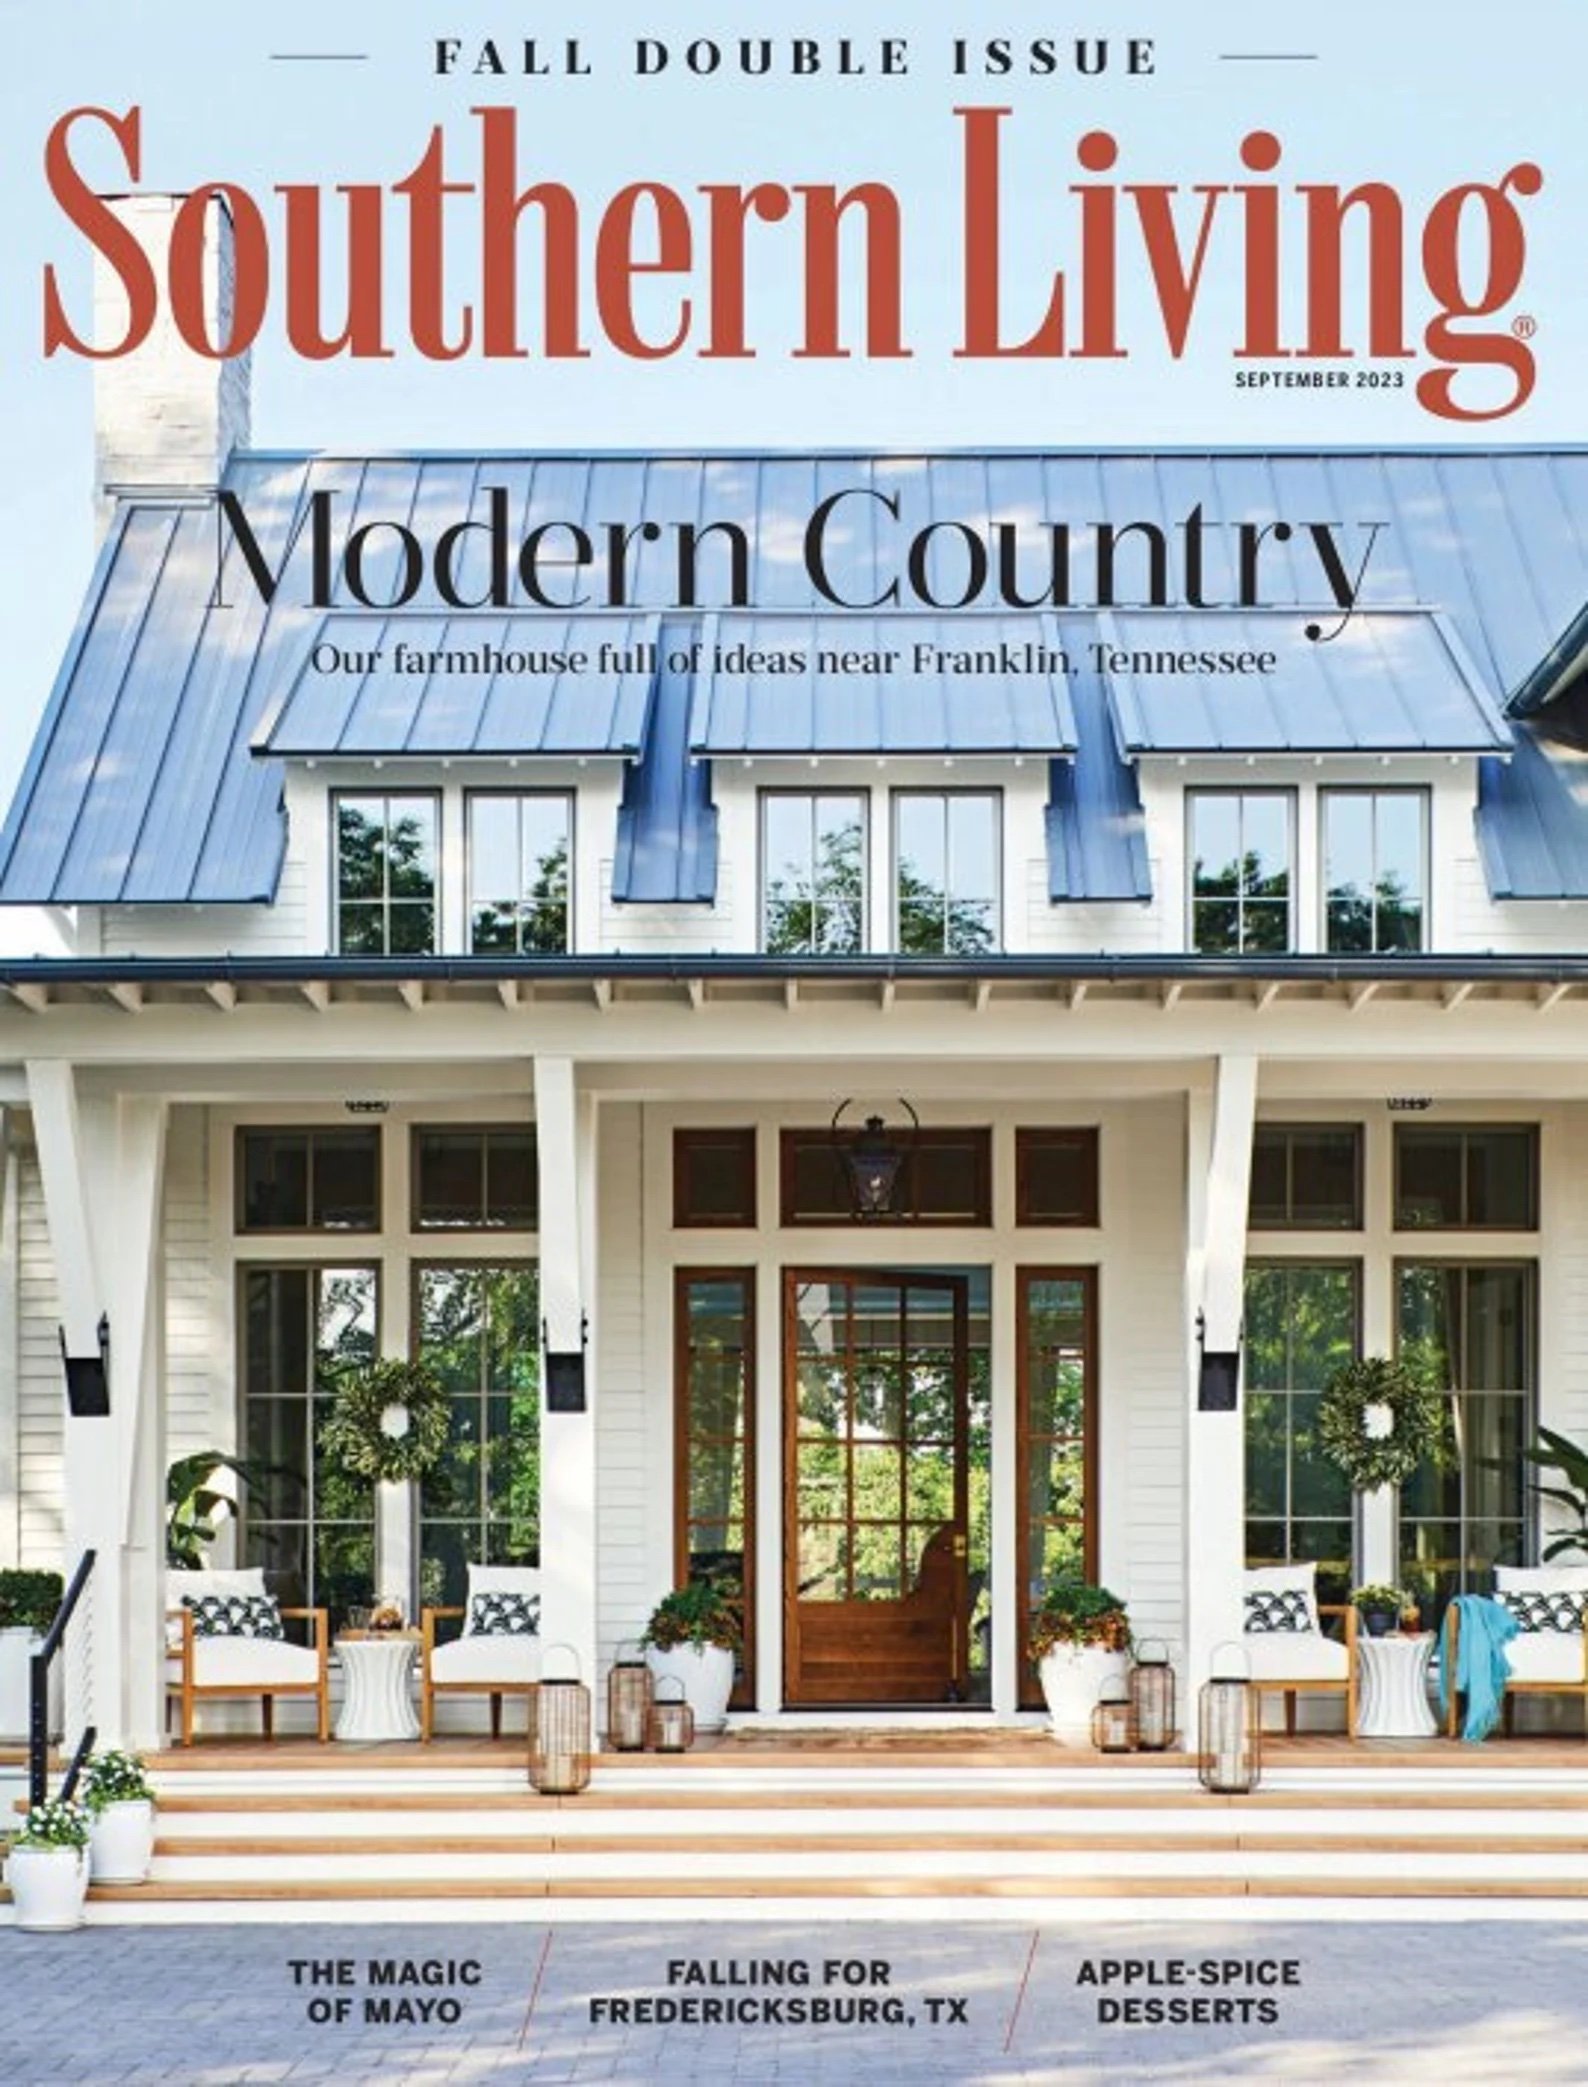 SouthernLivingIdeaHouse.jpg